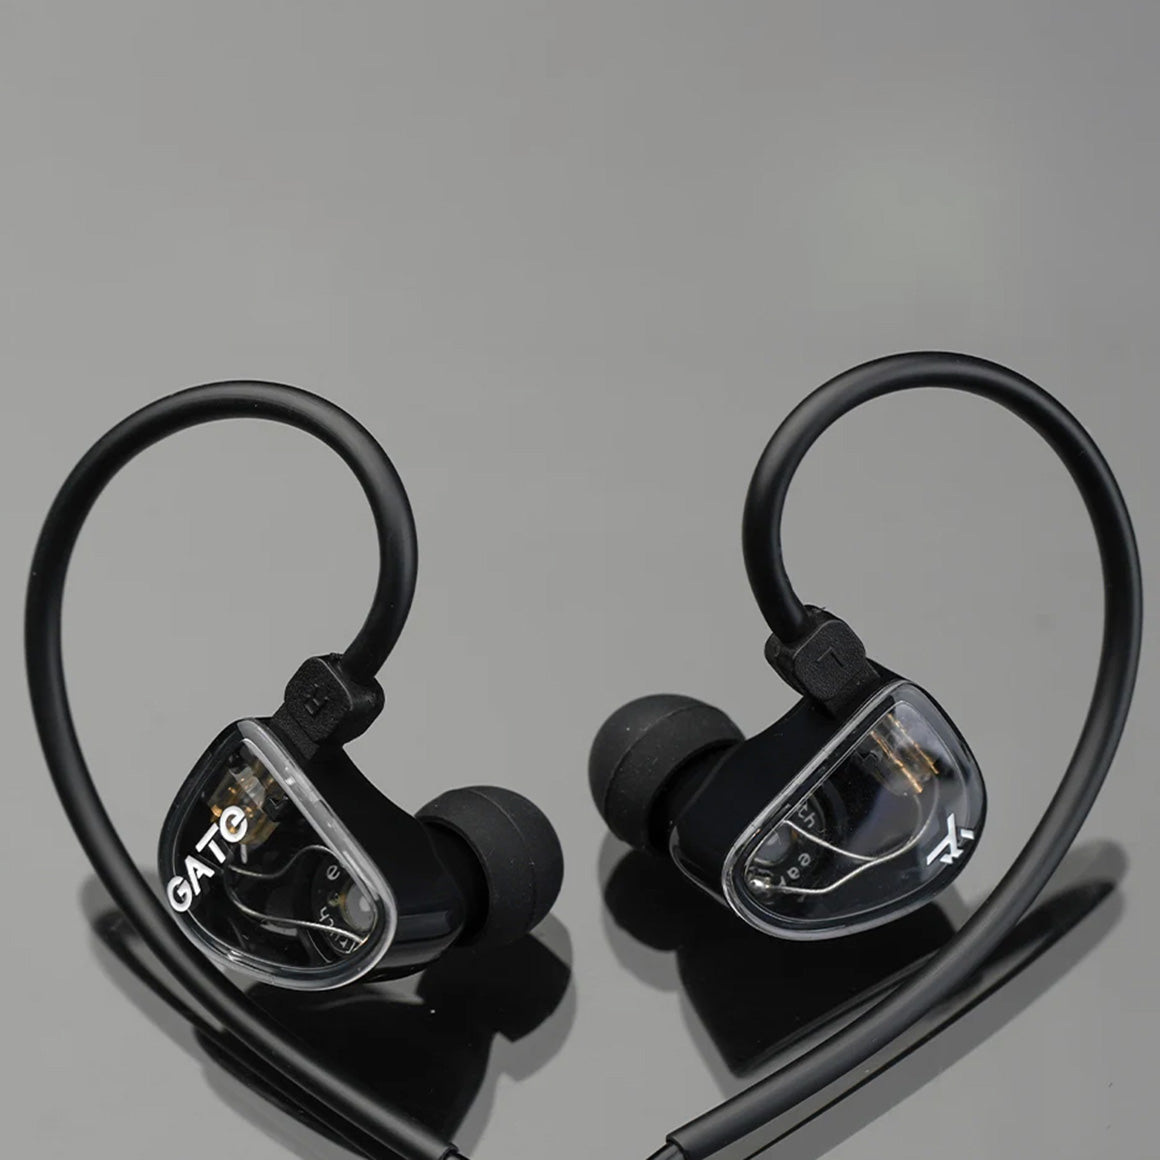 Headphone-Zone-Truthear-GATe-Black-Without-Mic